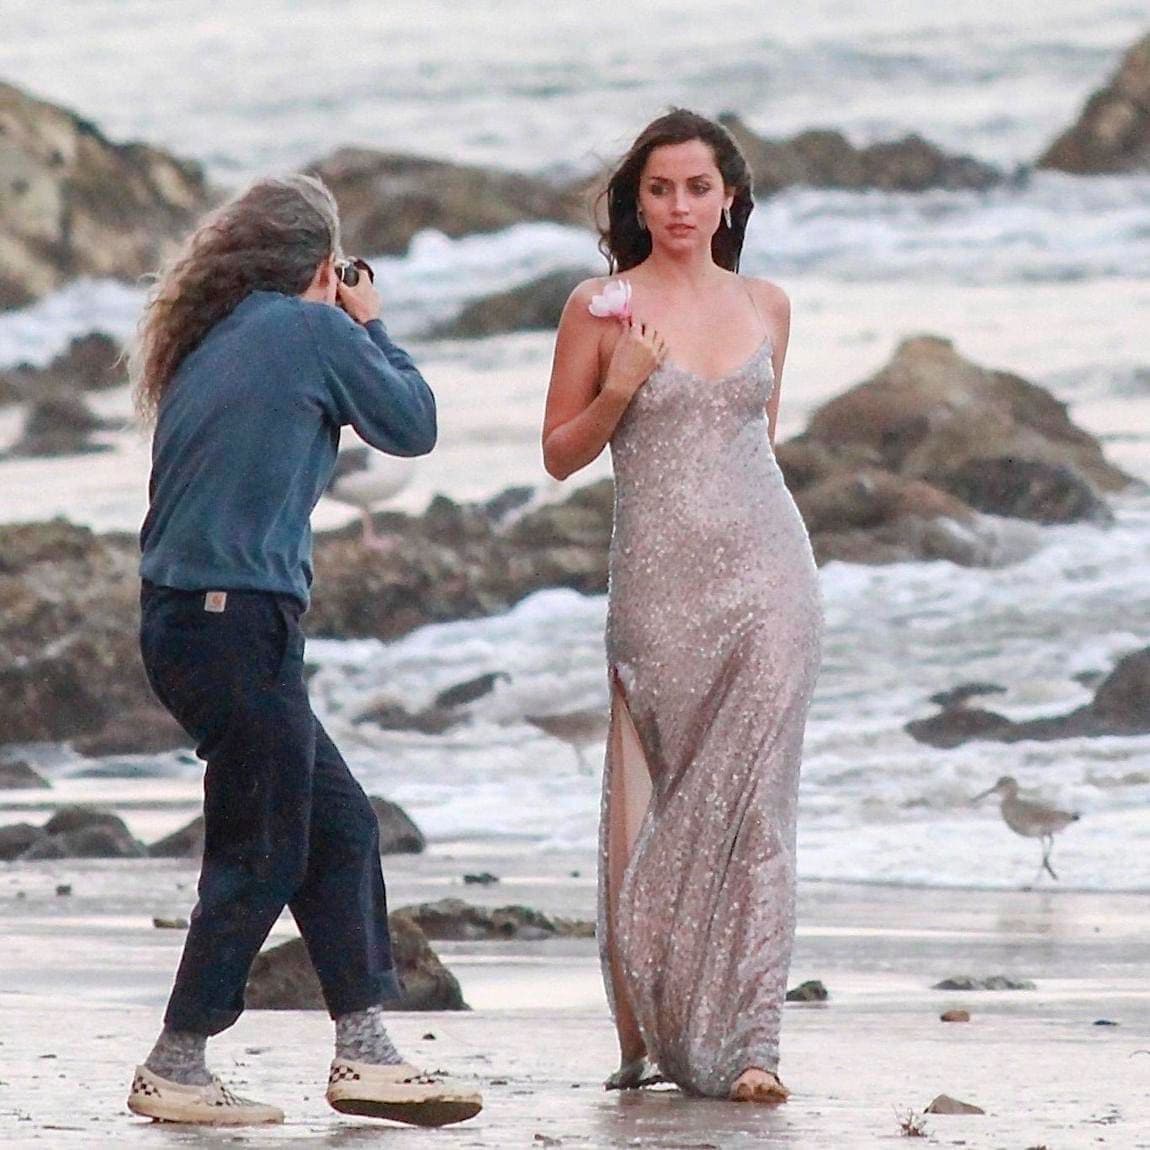 Ana de Armas poses at the beach for a perfume commercial in Malibu.